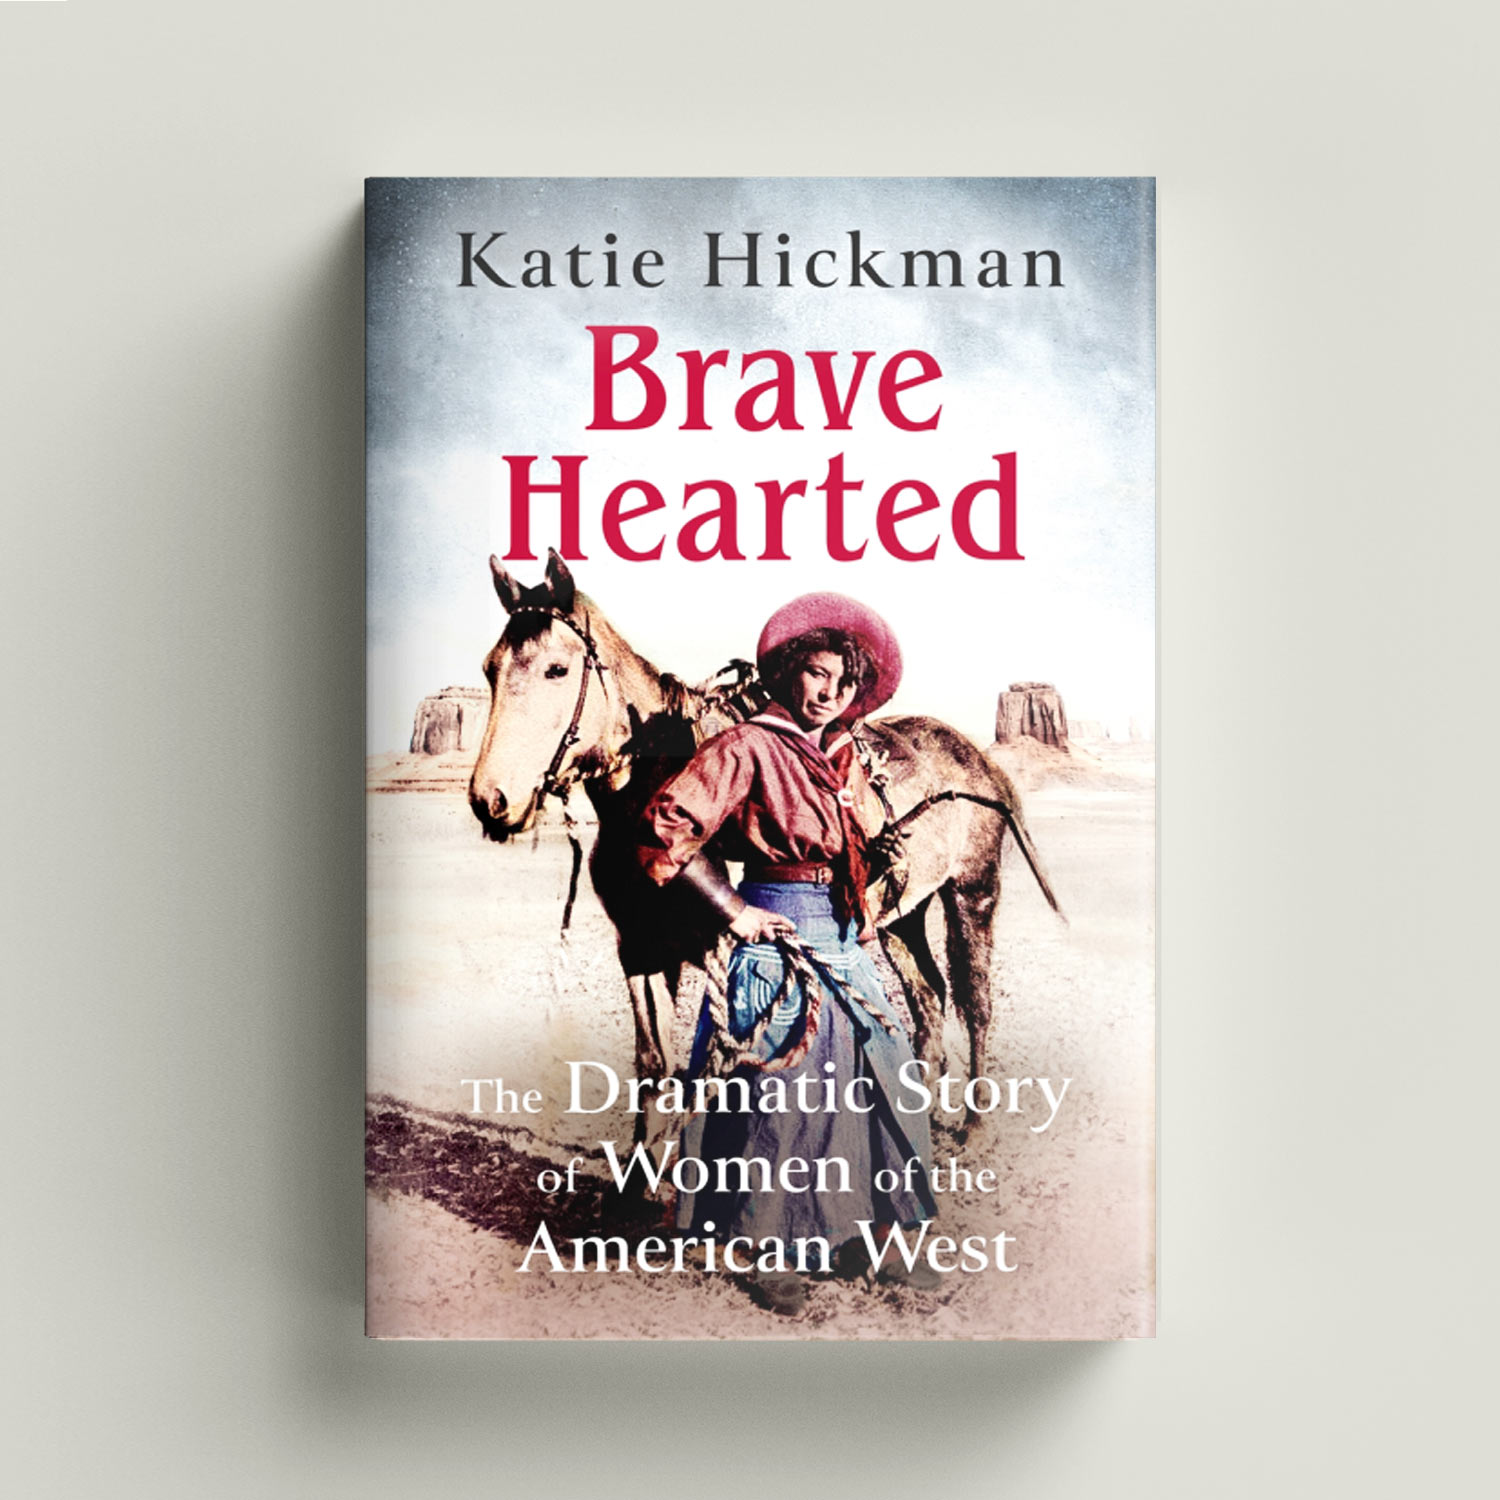 Brave Hearted by Katie Hickman